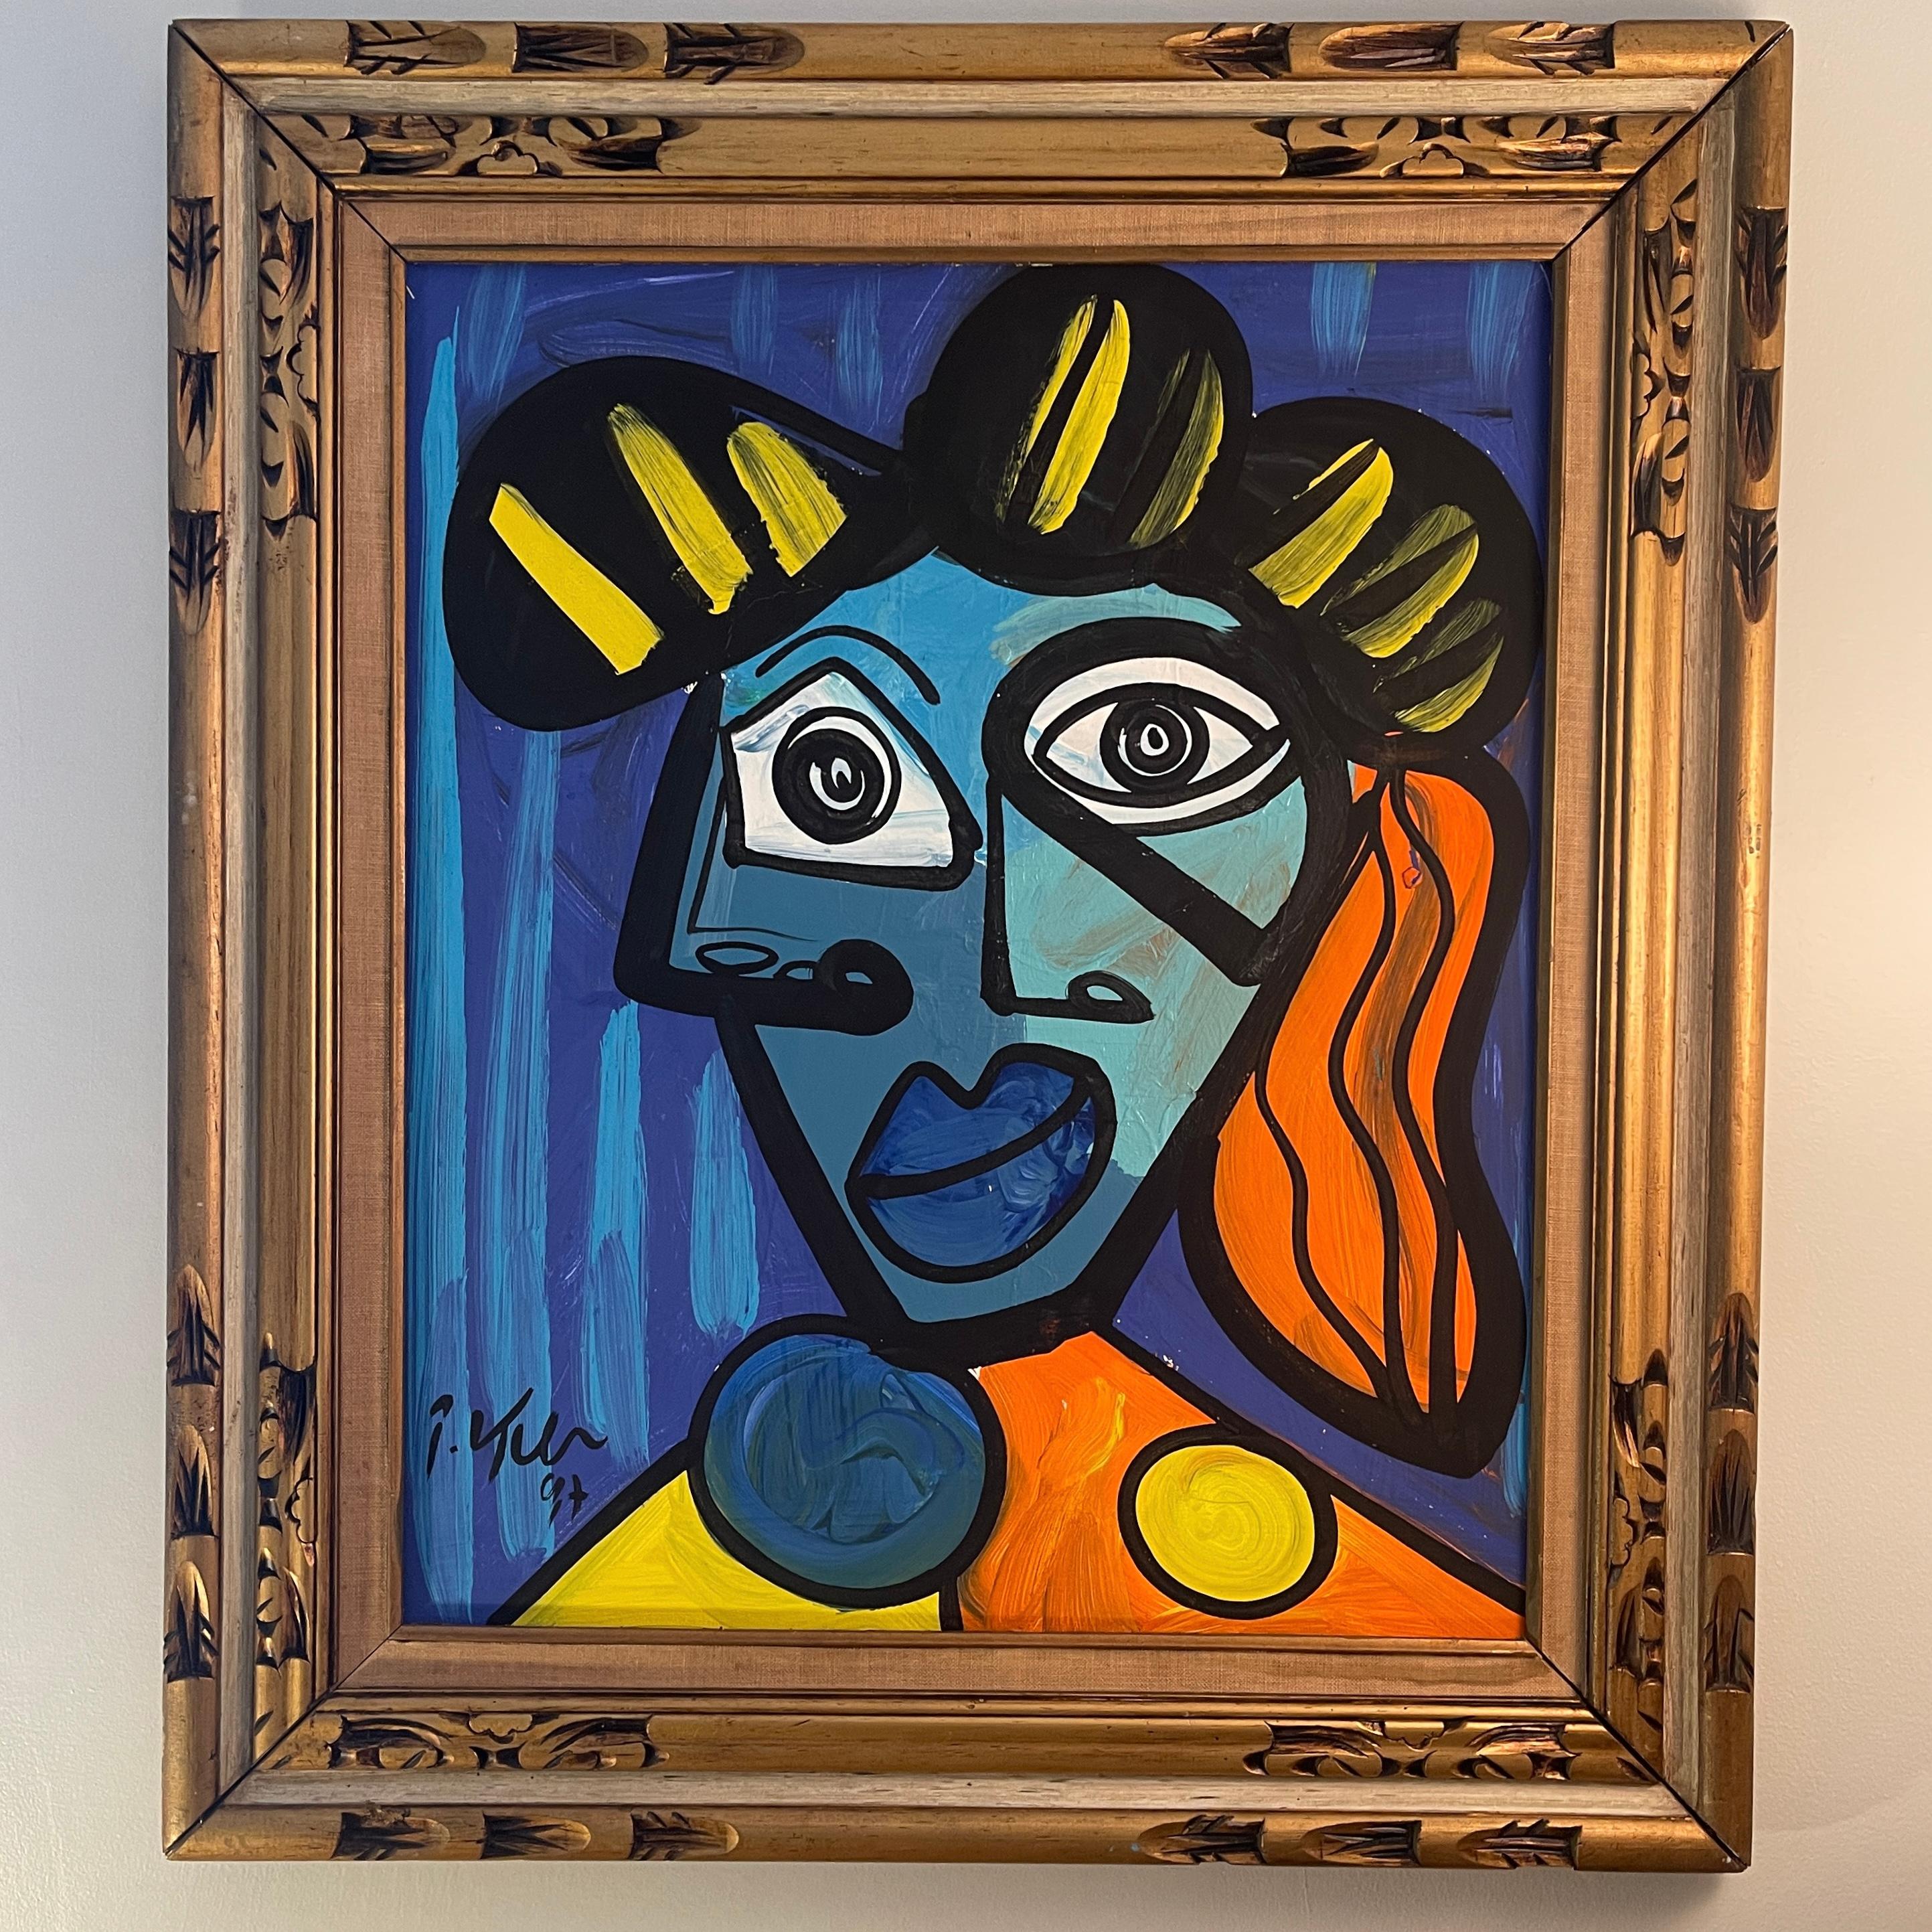 Peter Keil's gold framed painting on canvas. Signed and dated 1997. This one is stunning in person. Amazing and decorative gold frame compliments Keil's Picasso inspired painting of 'Paloma'.  This piece is stunning with vibrant hues and ready to